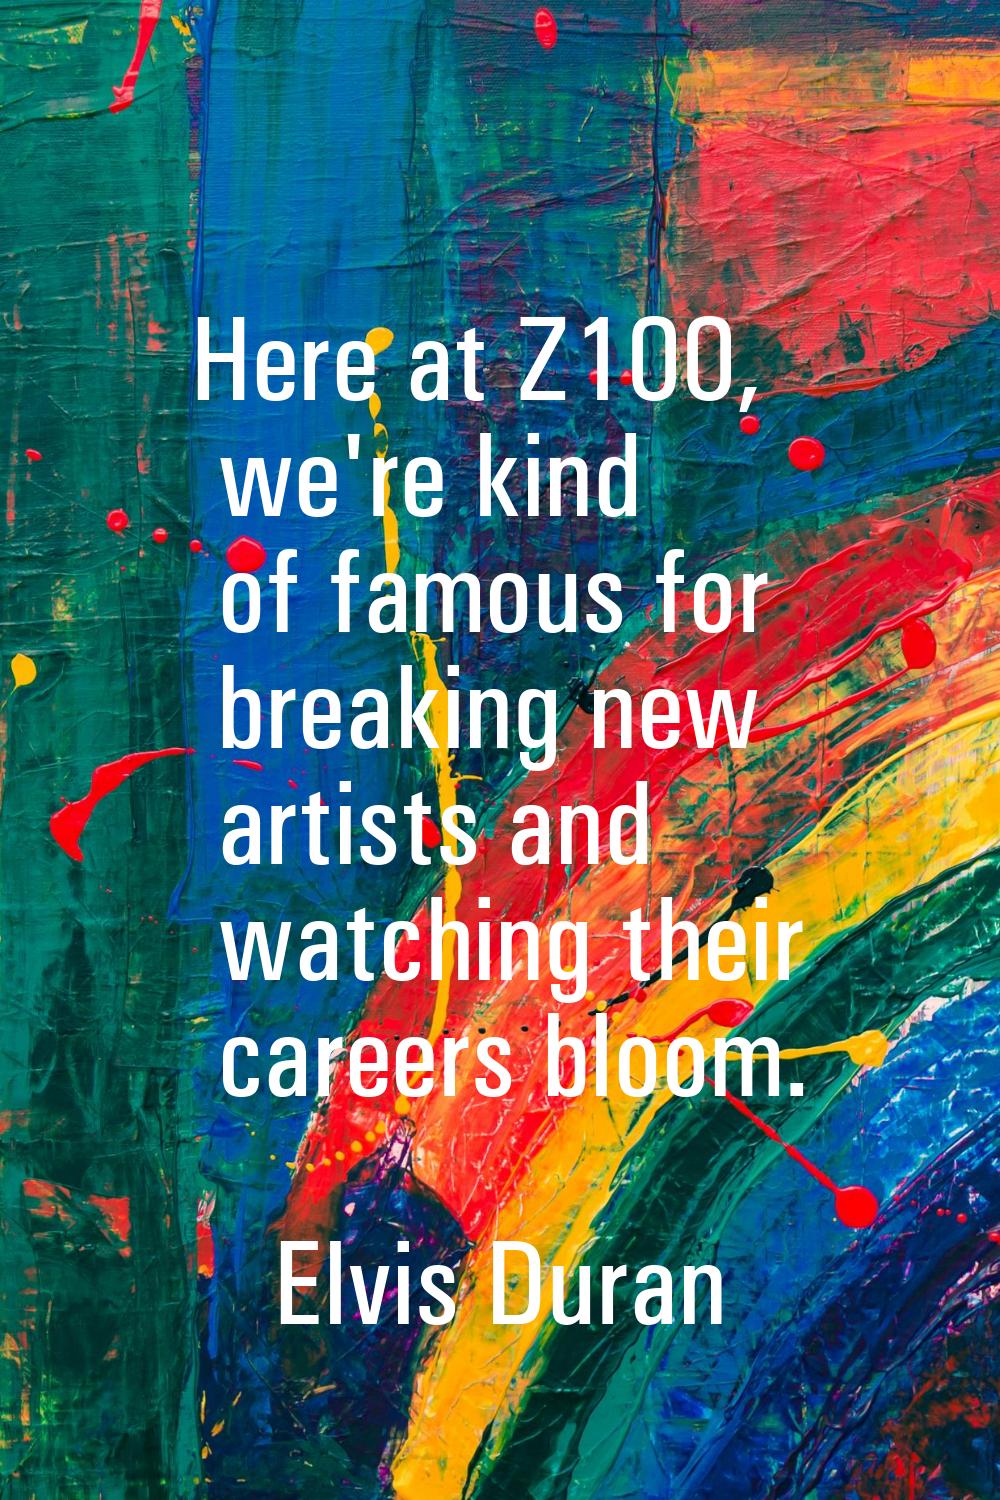 Here at Z100, we're kind of famous for breaking new artists and watching their careers bloom.